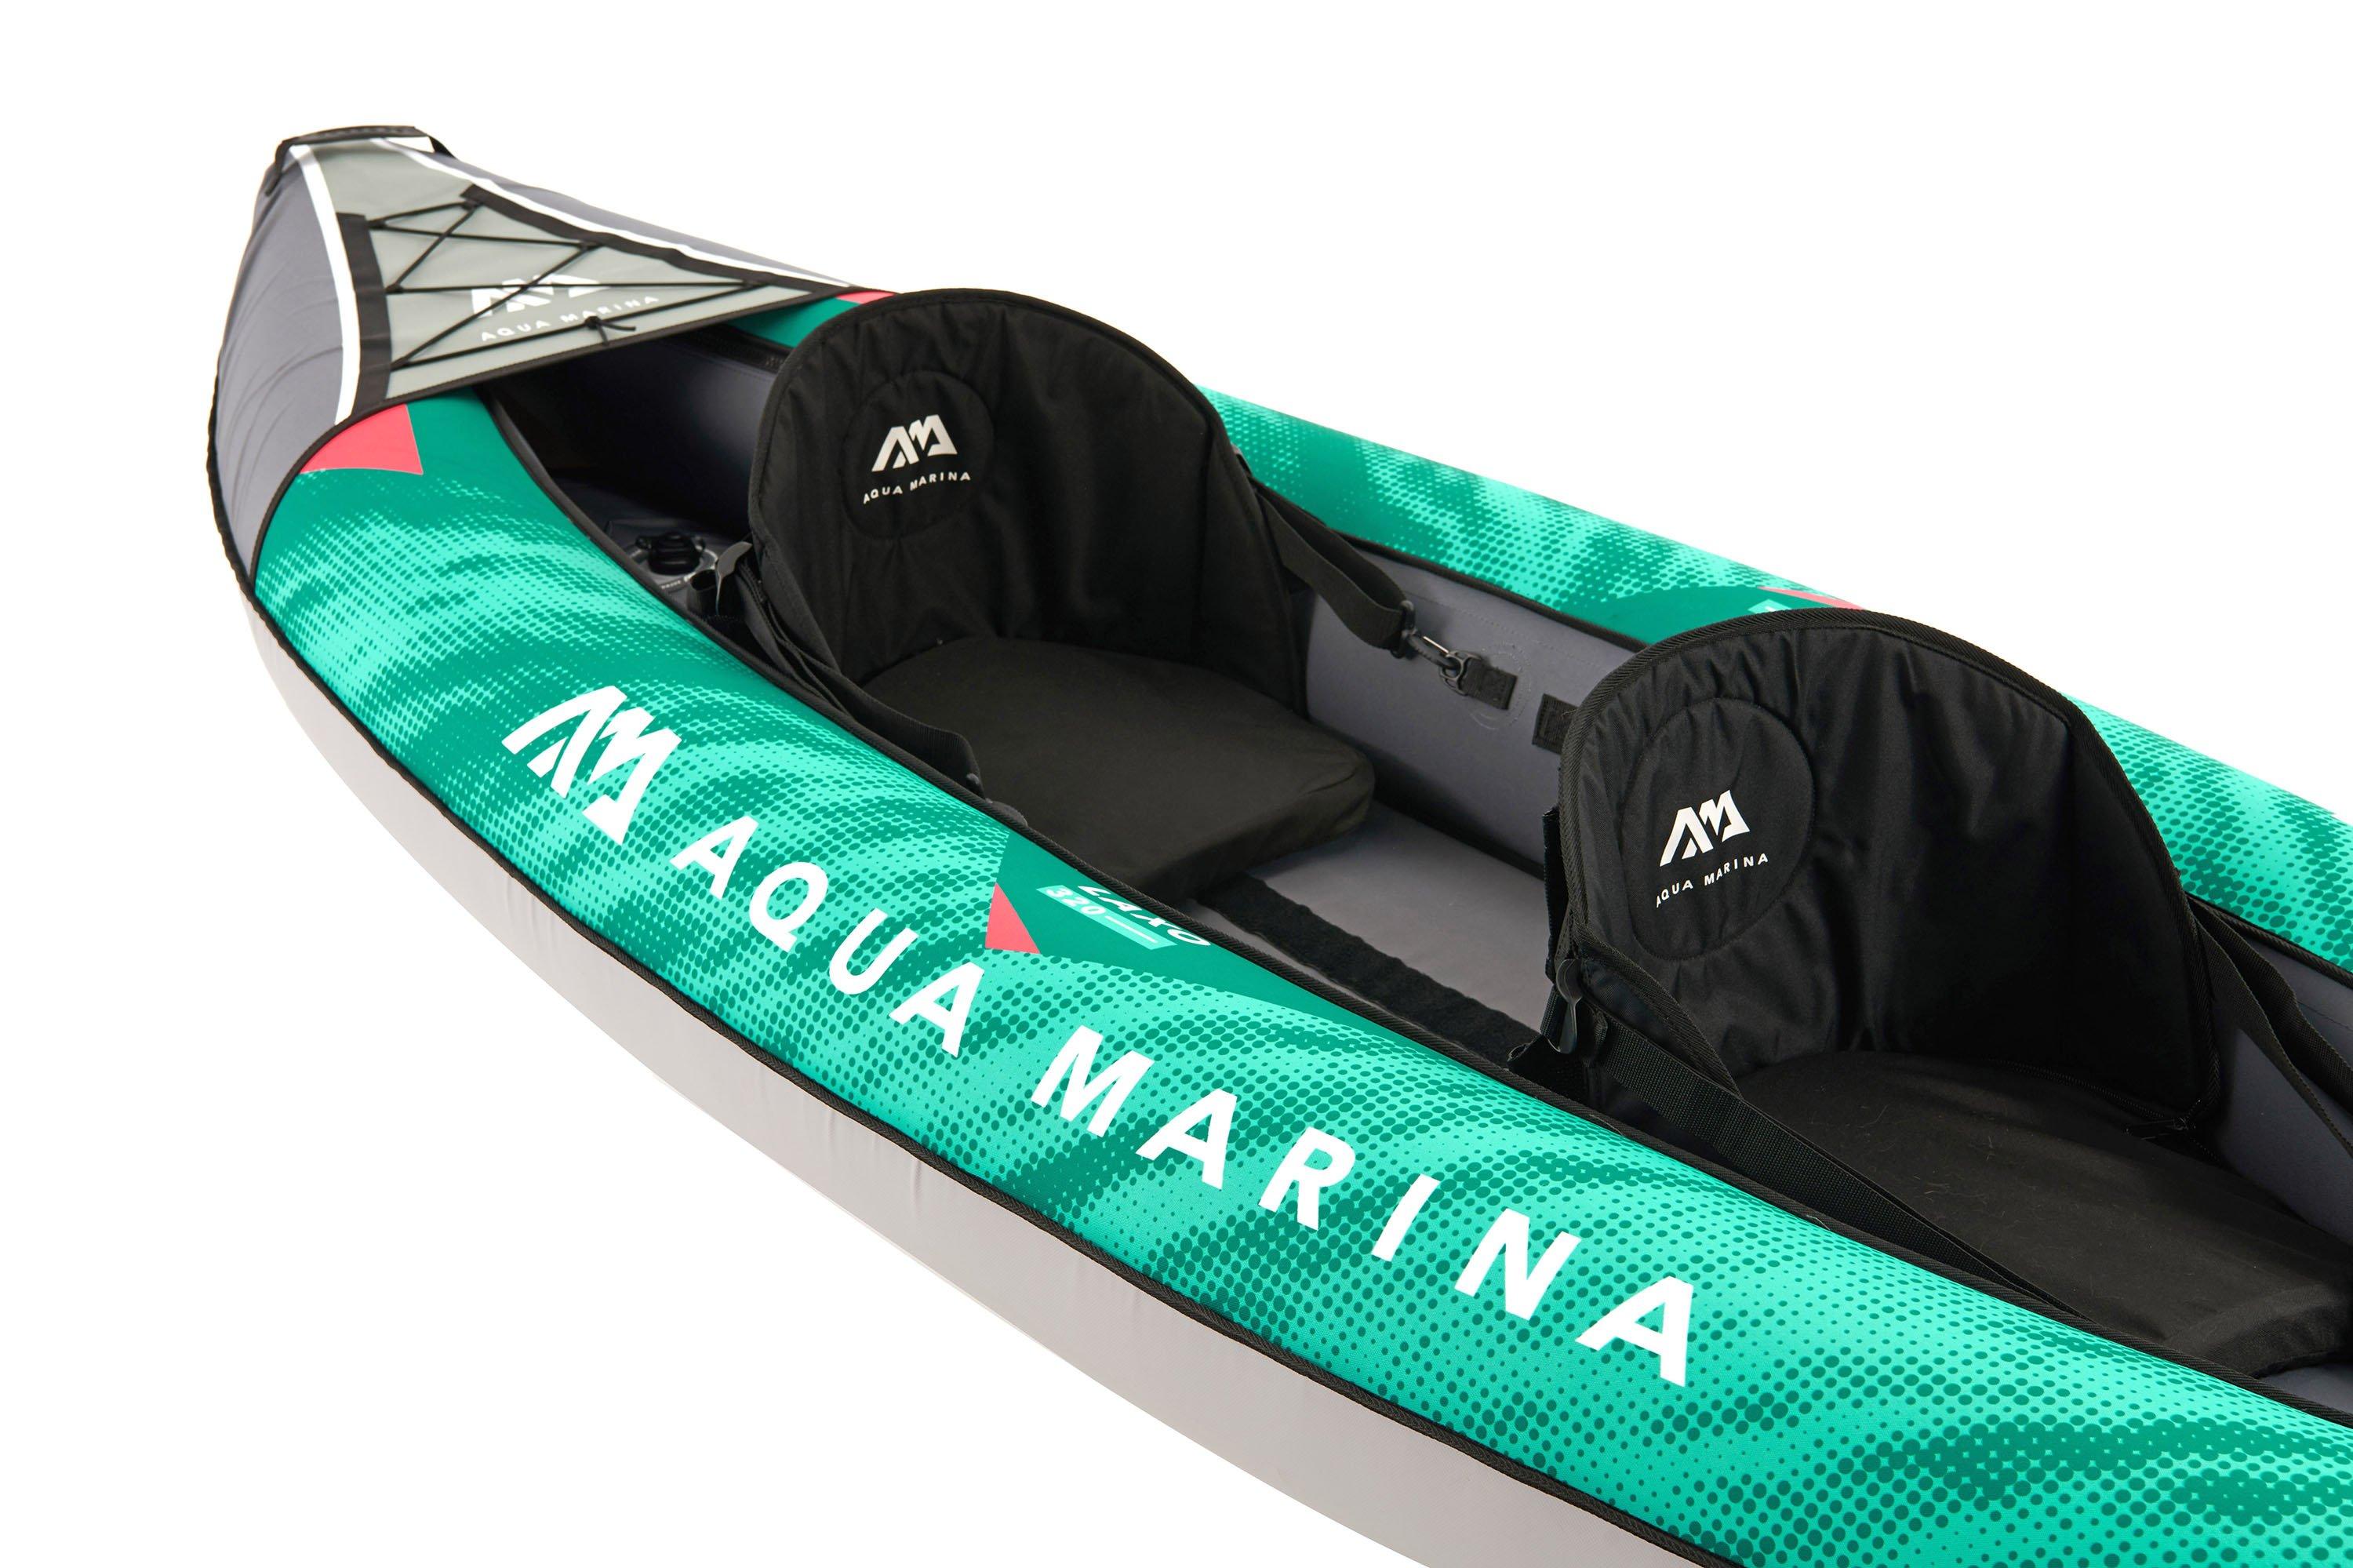 Laxo 320 Leisure 2-Person Kayak - DTI Direct Canada